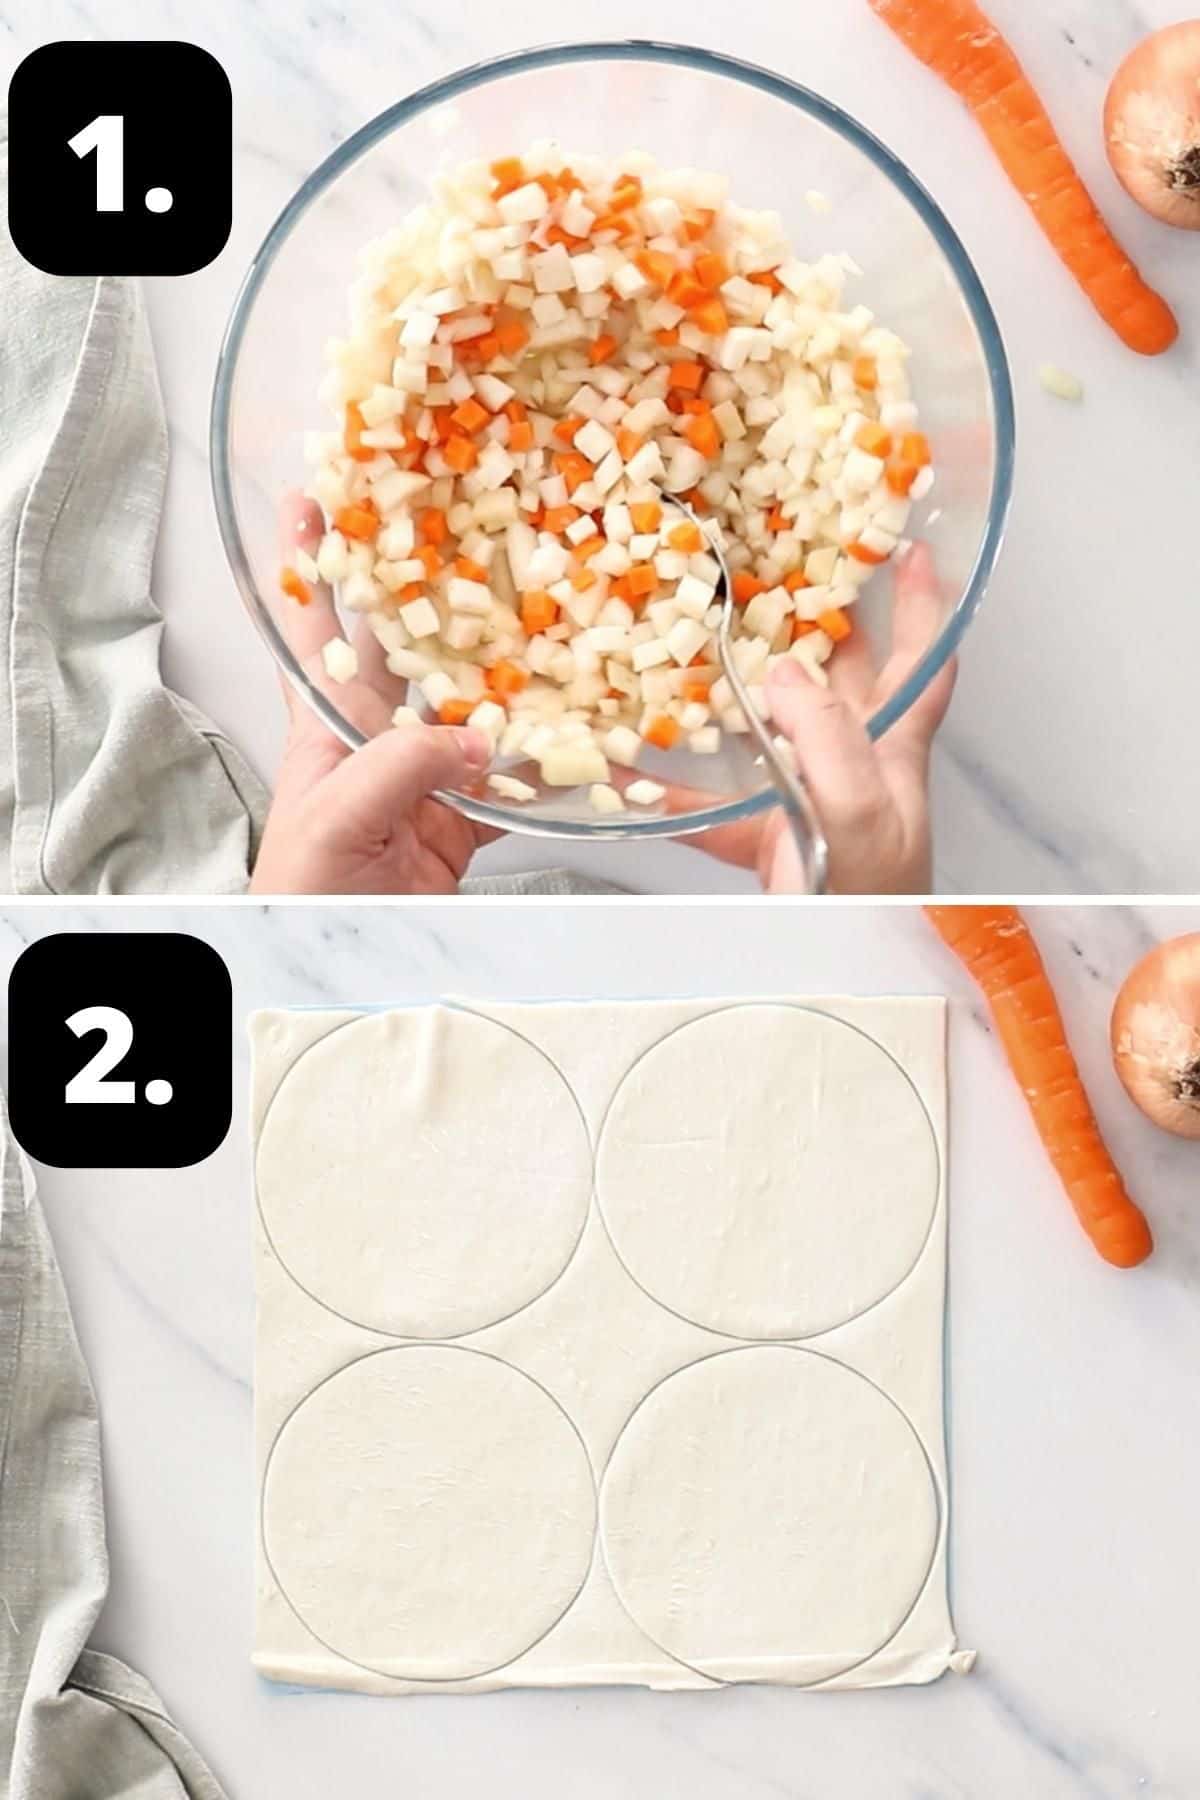 Steps 1-2 of preparing this recipe - the chopped vegetables in a glass bowl and the cut rounds from the puff pastry sheet.